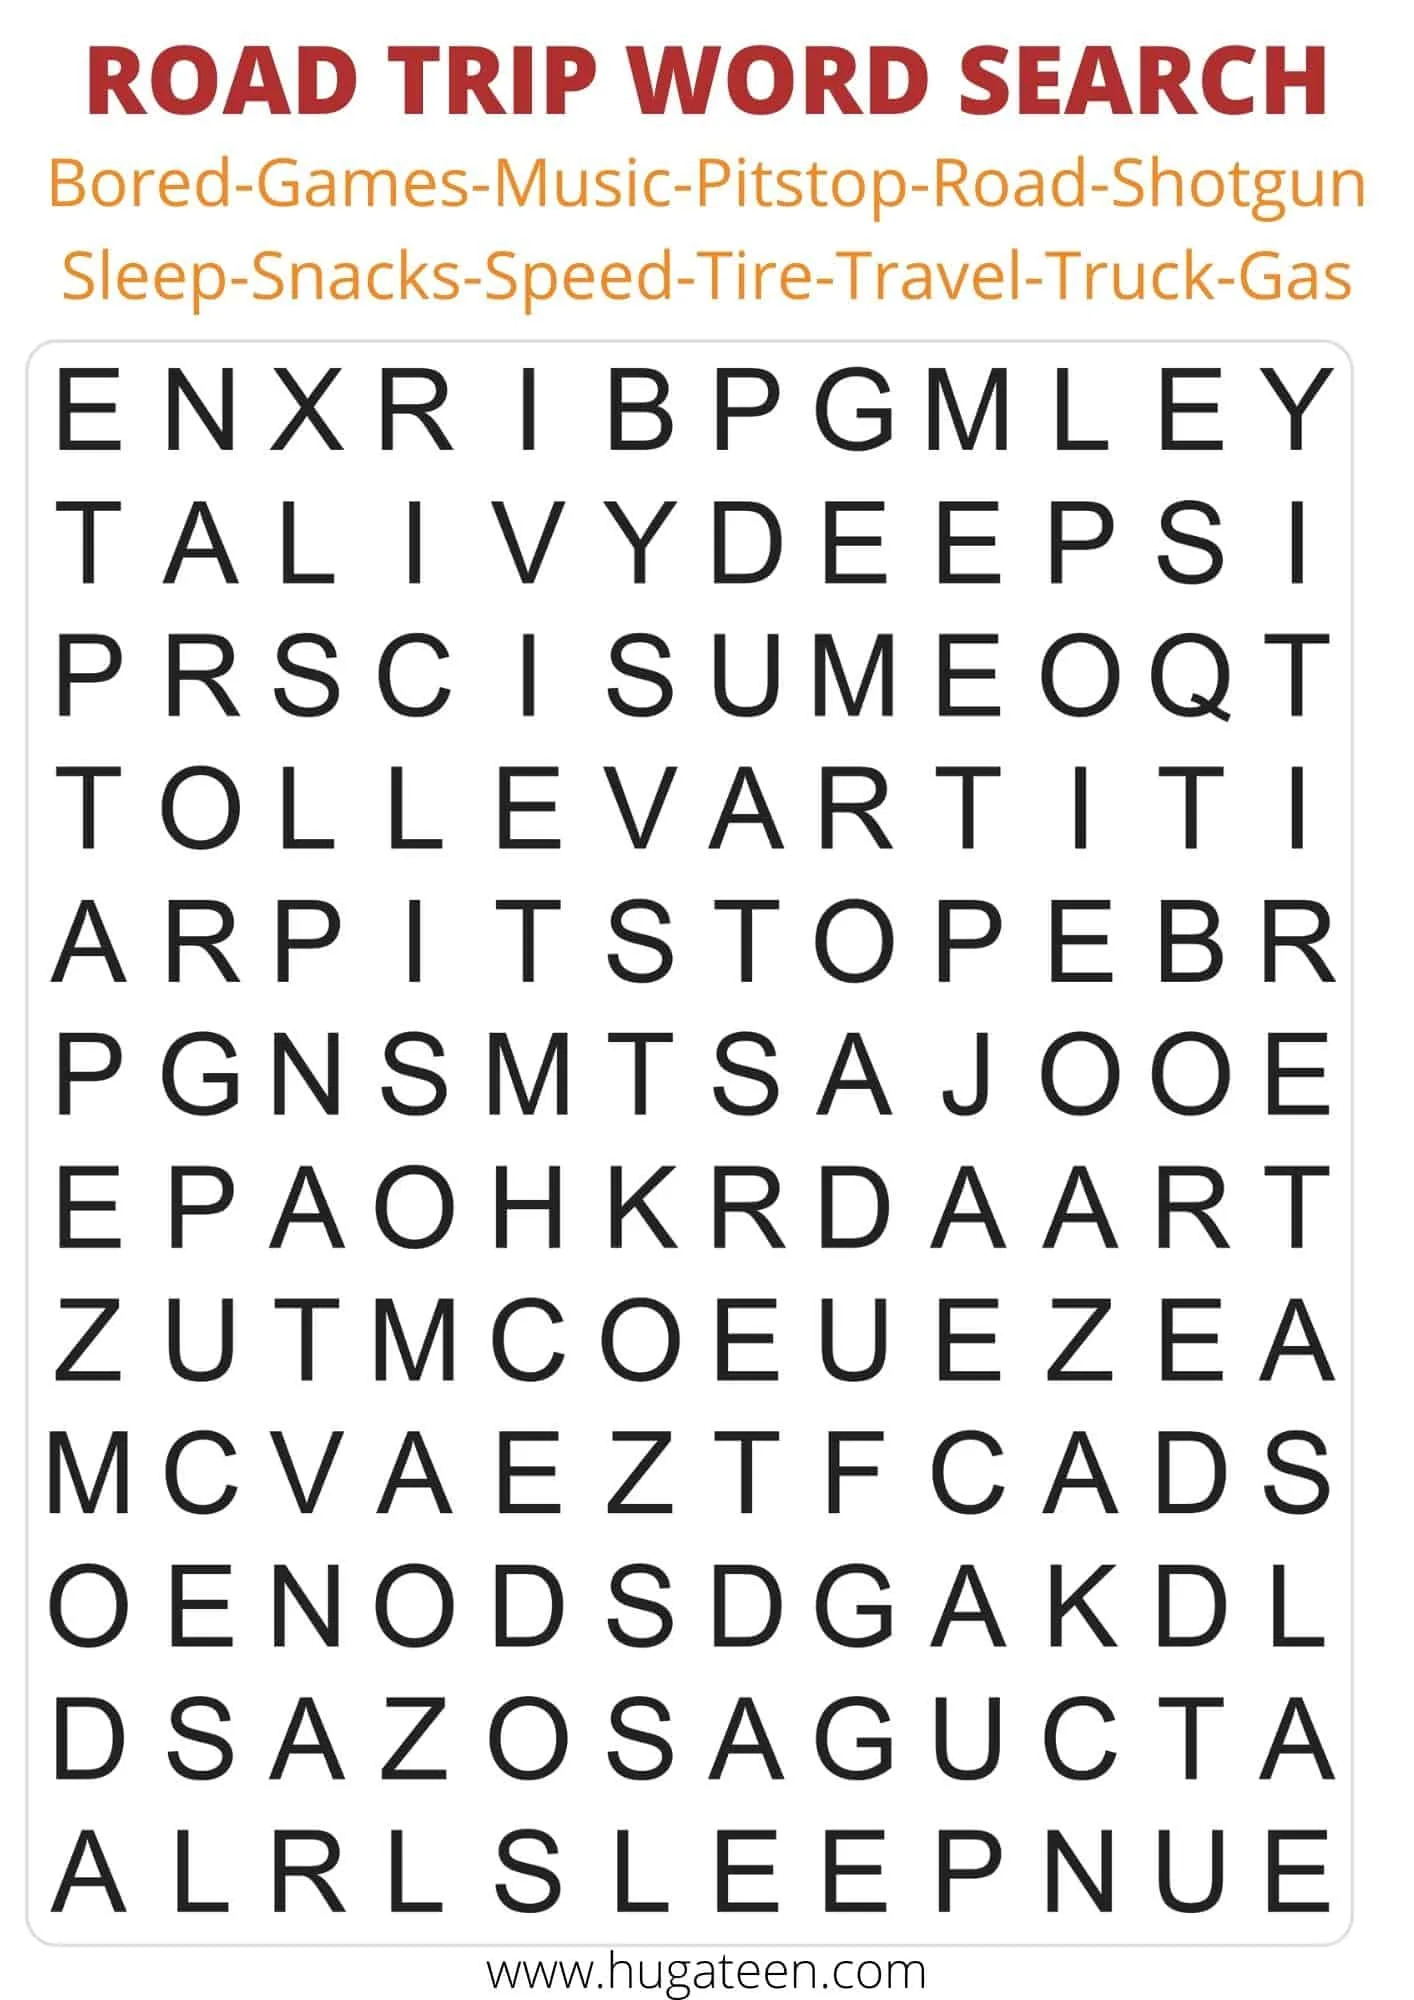 Road trip Word Search